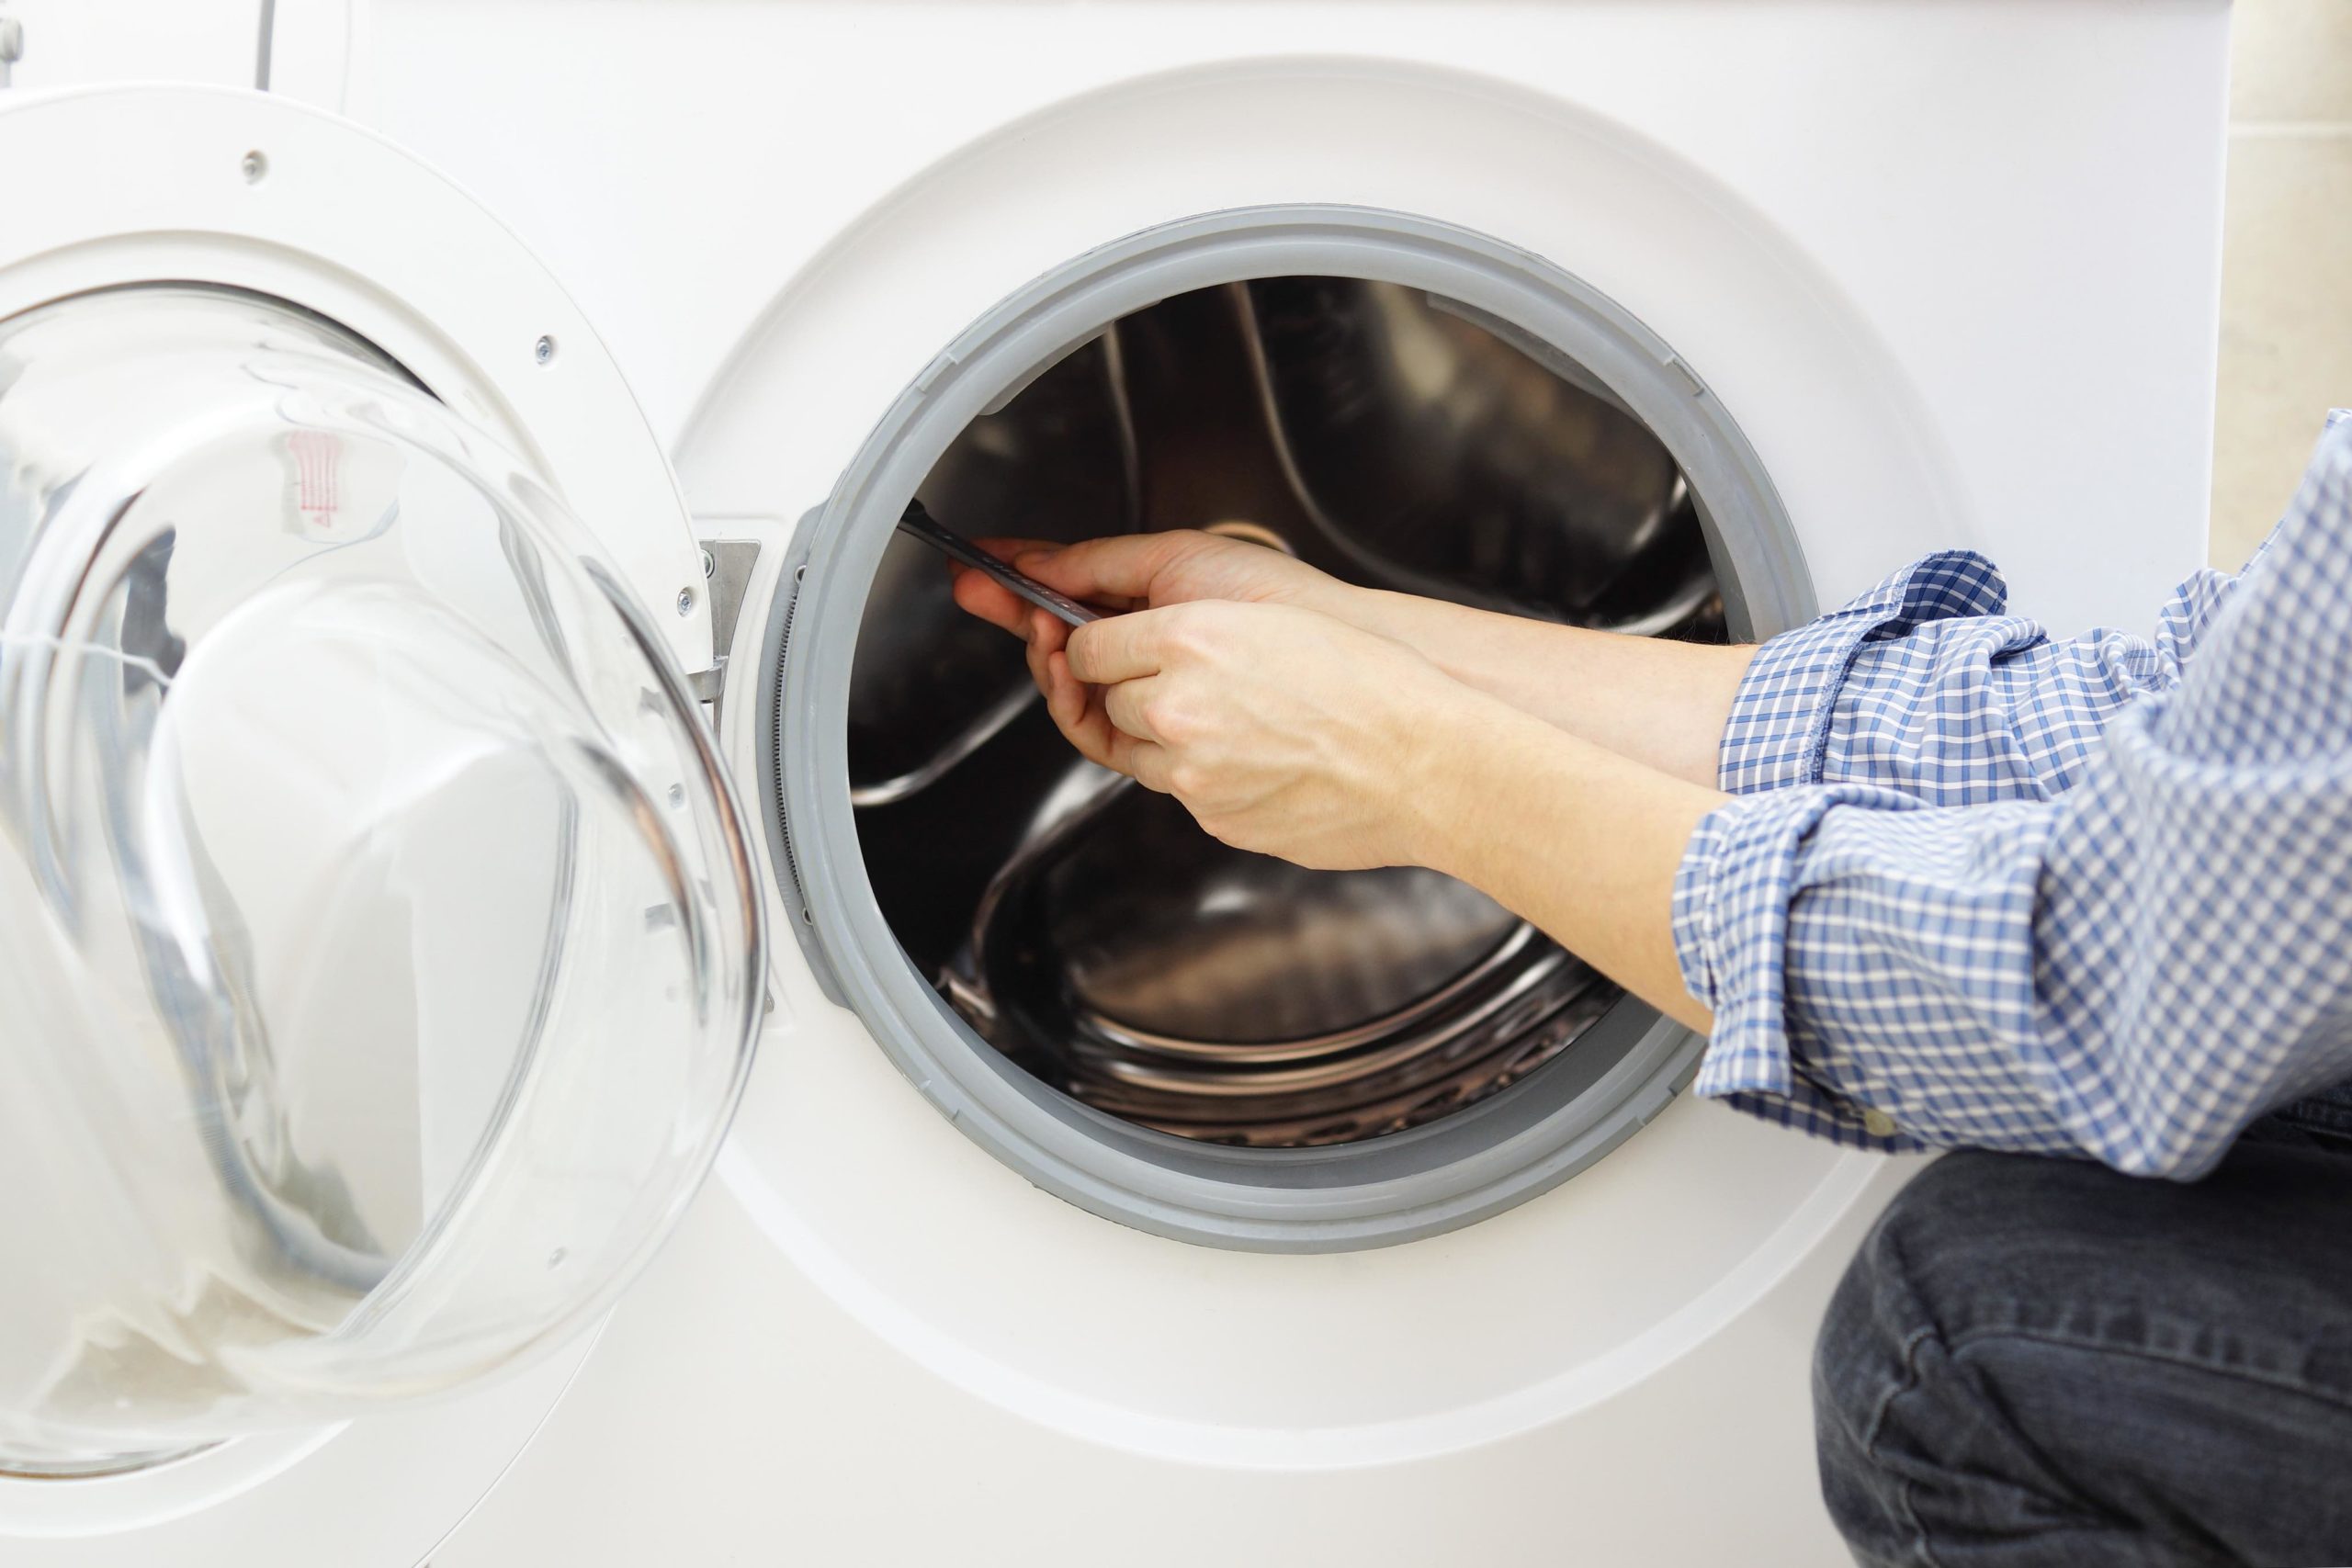 How To Fix The Error Code F85 For Whirlpool Dryer